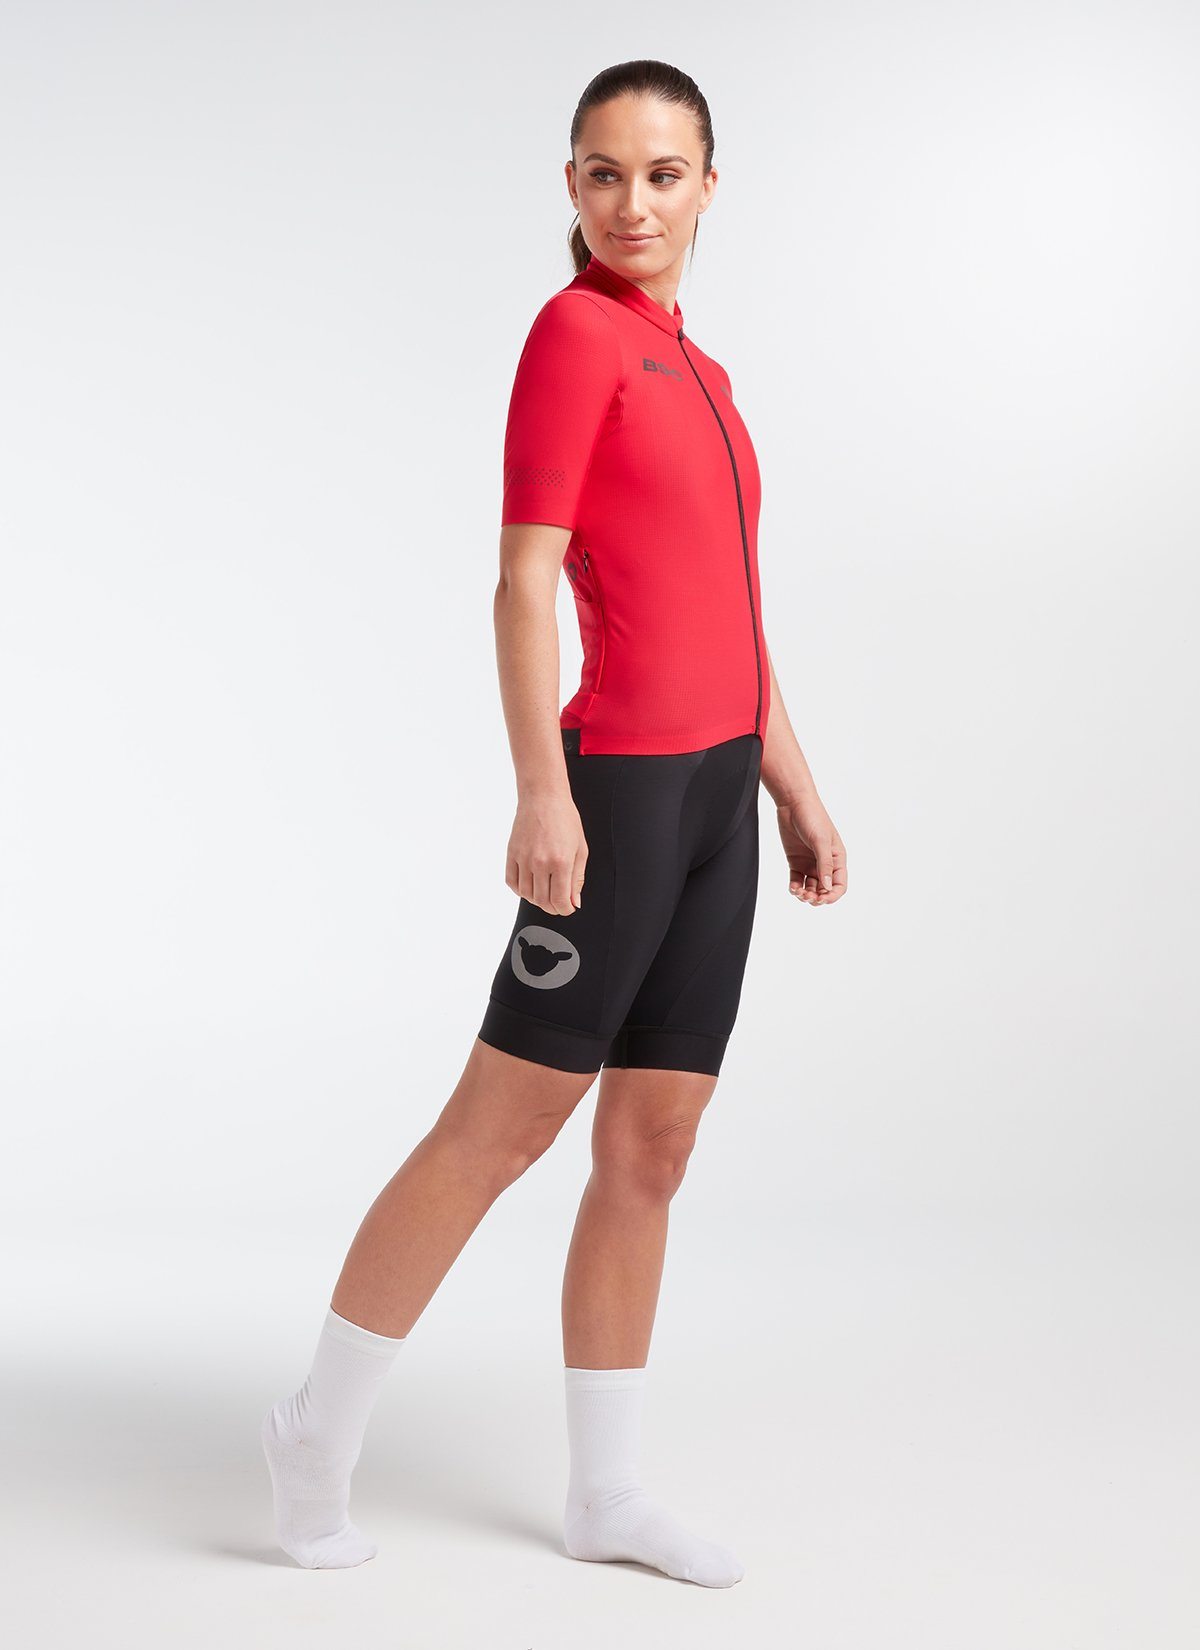 Women's Elements SS Thermal Jersey - Jester Red